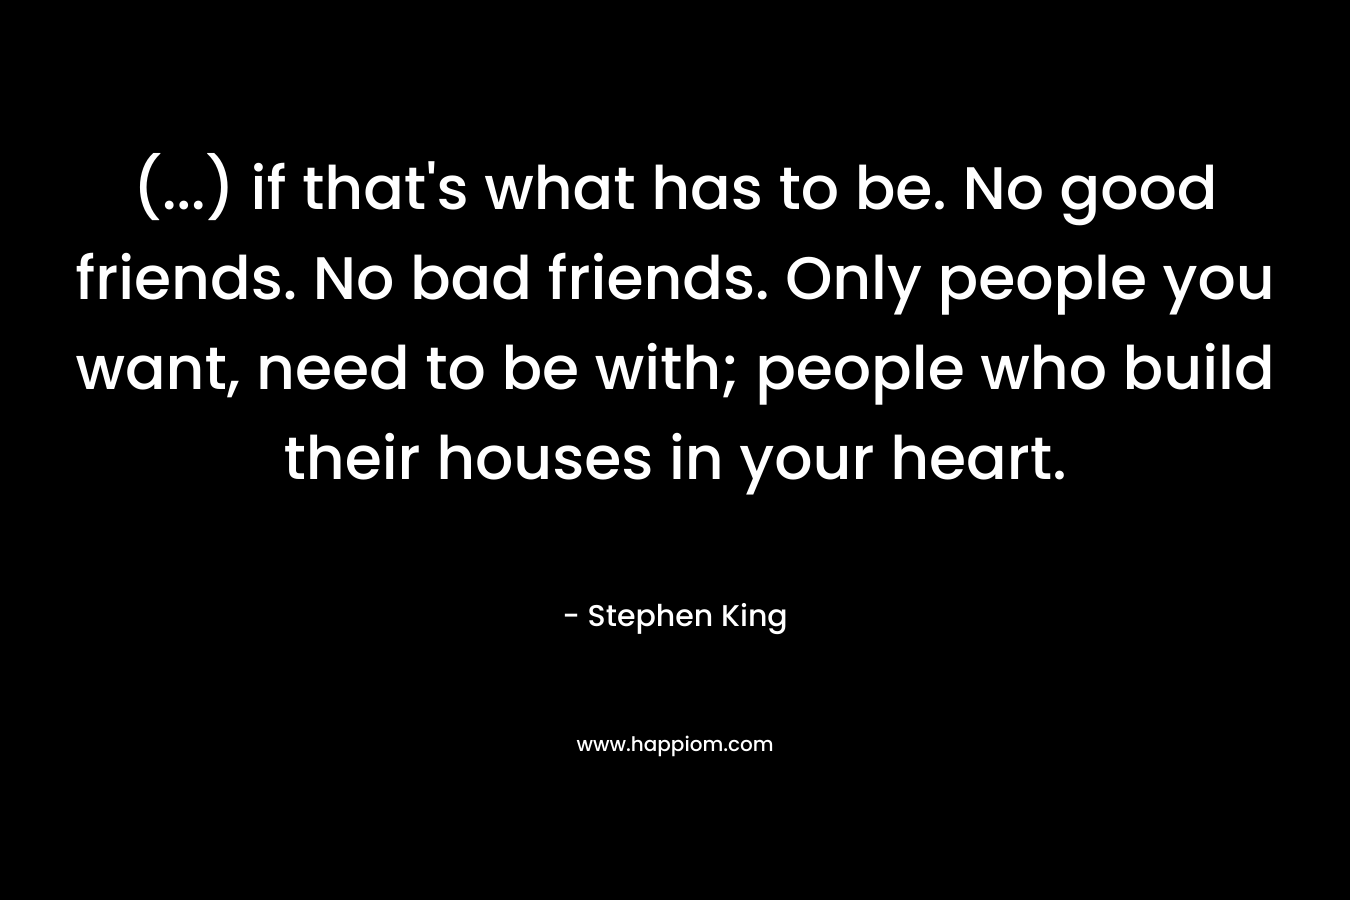 (...) if that's what has to be. No good friends. No bad friends. Only people you want, need to be with; people who build their houses in your heart.